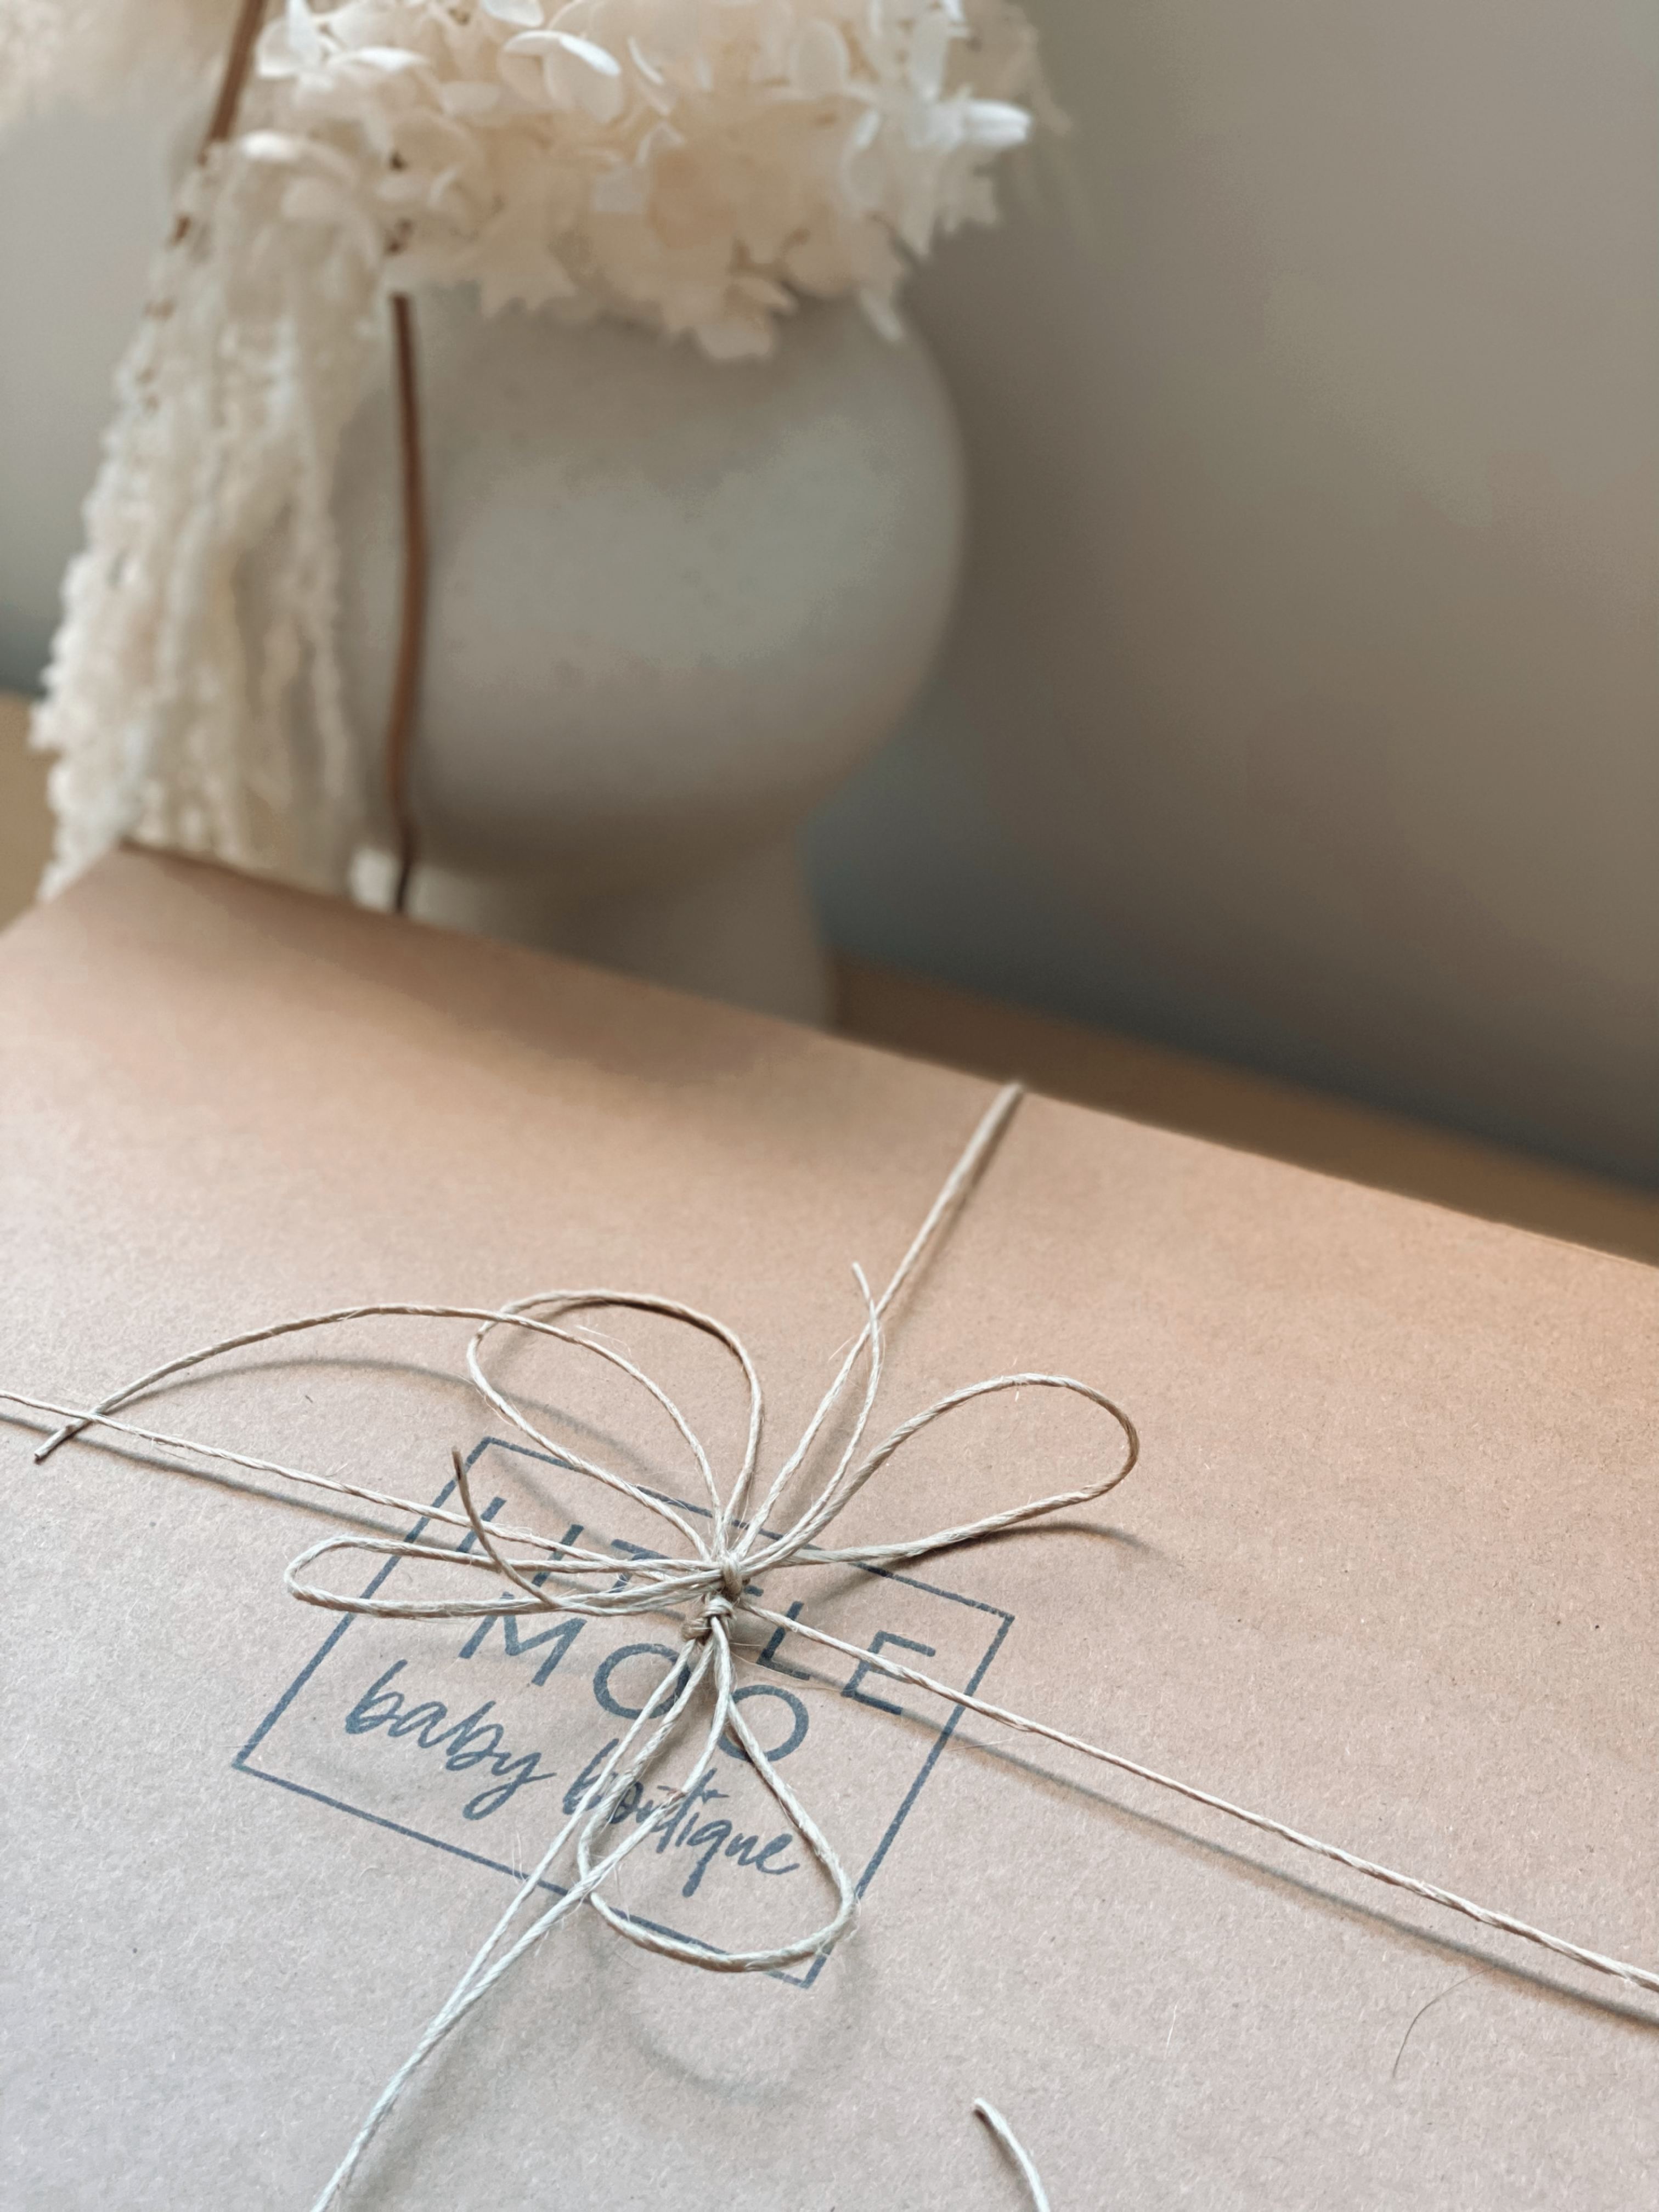 Create Your Own Gift Box